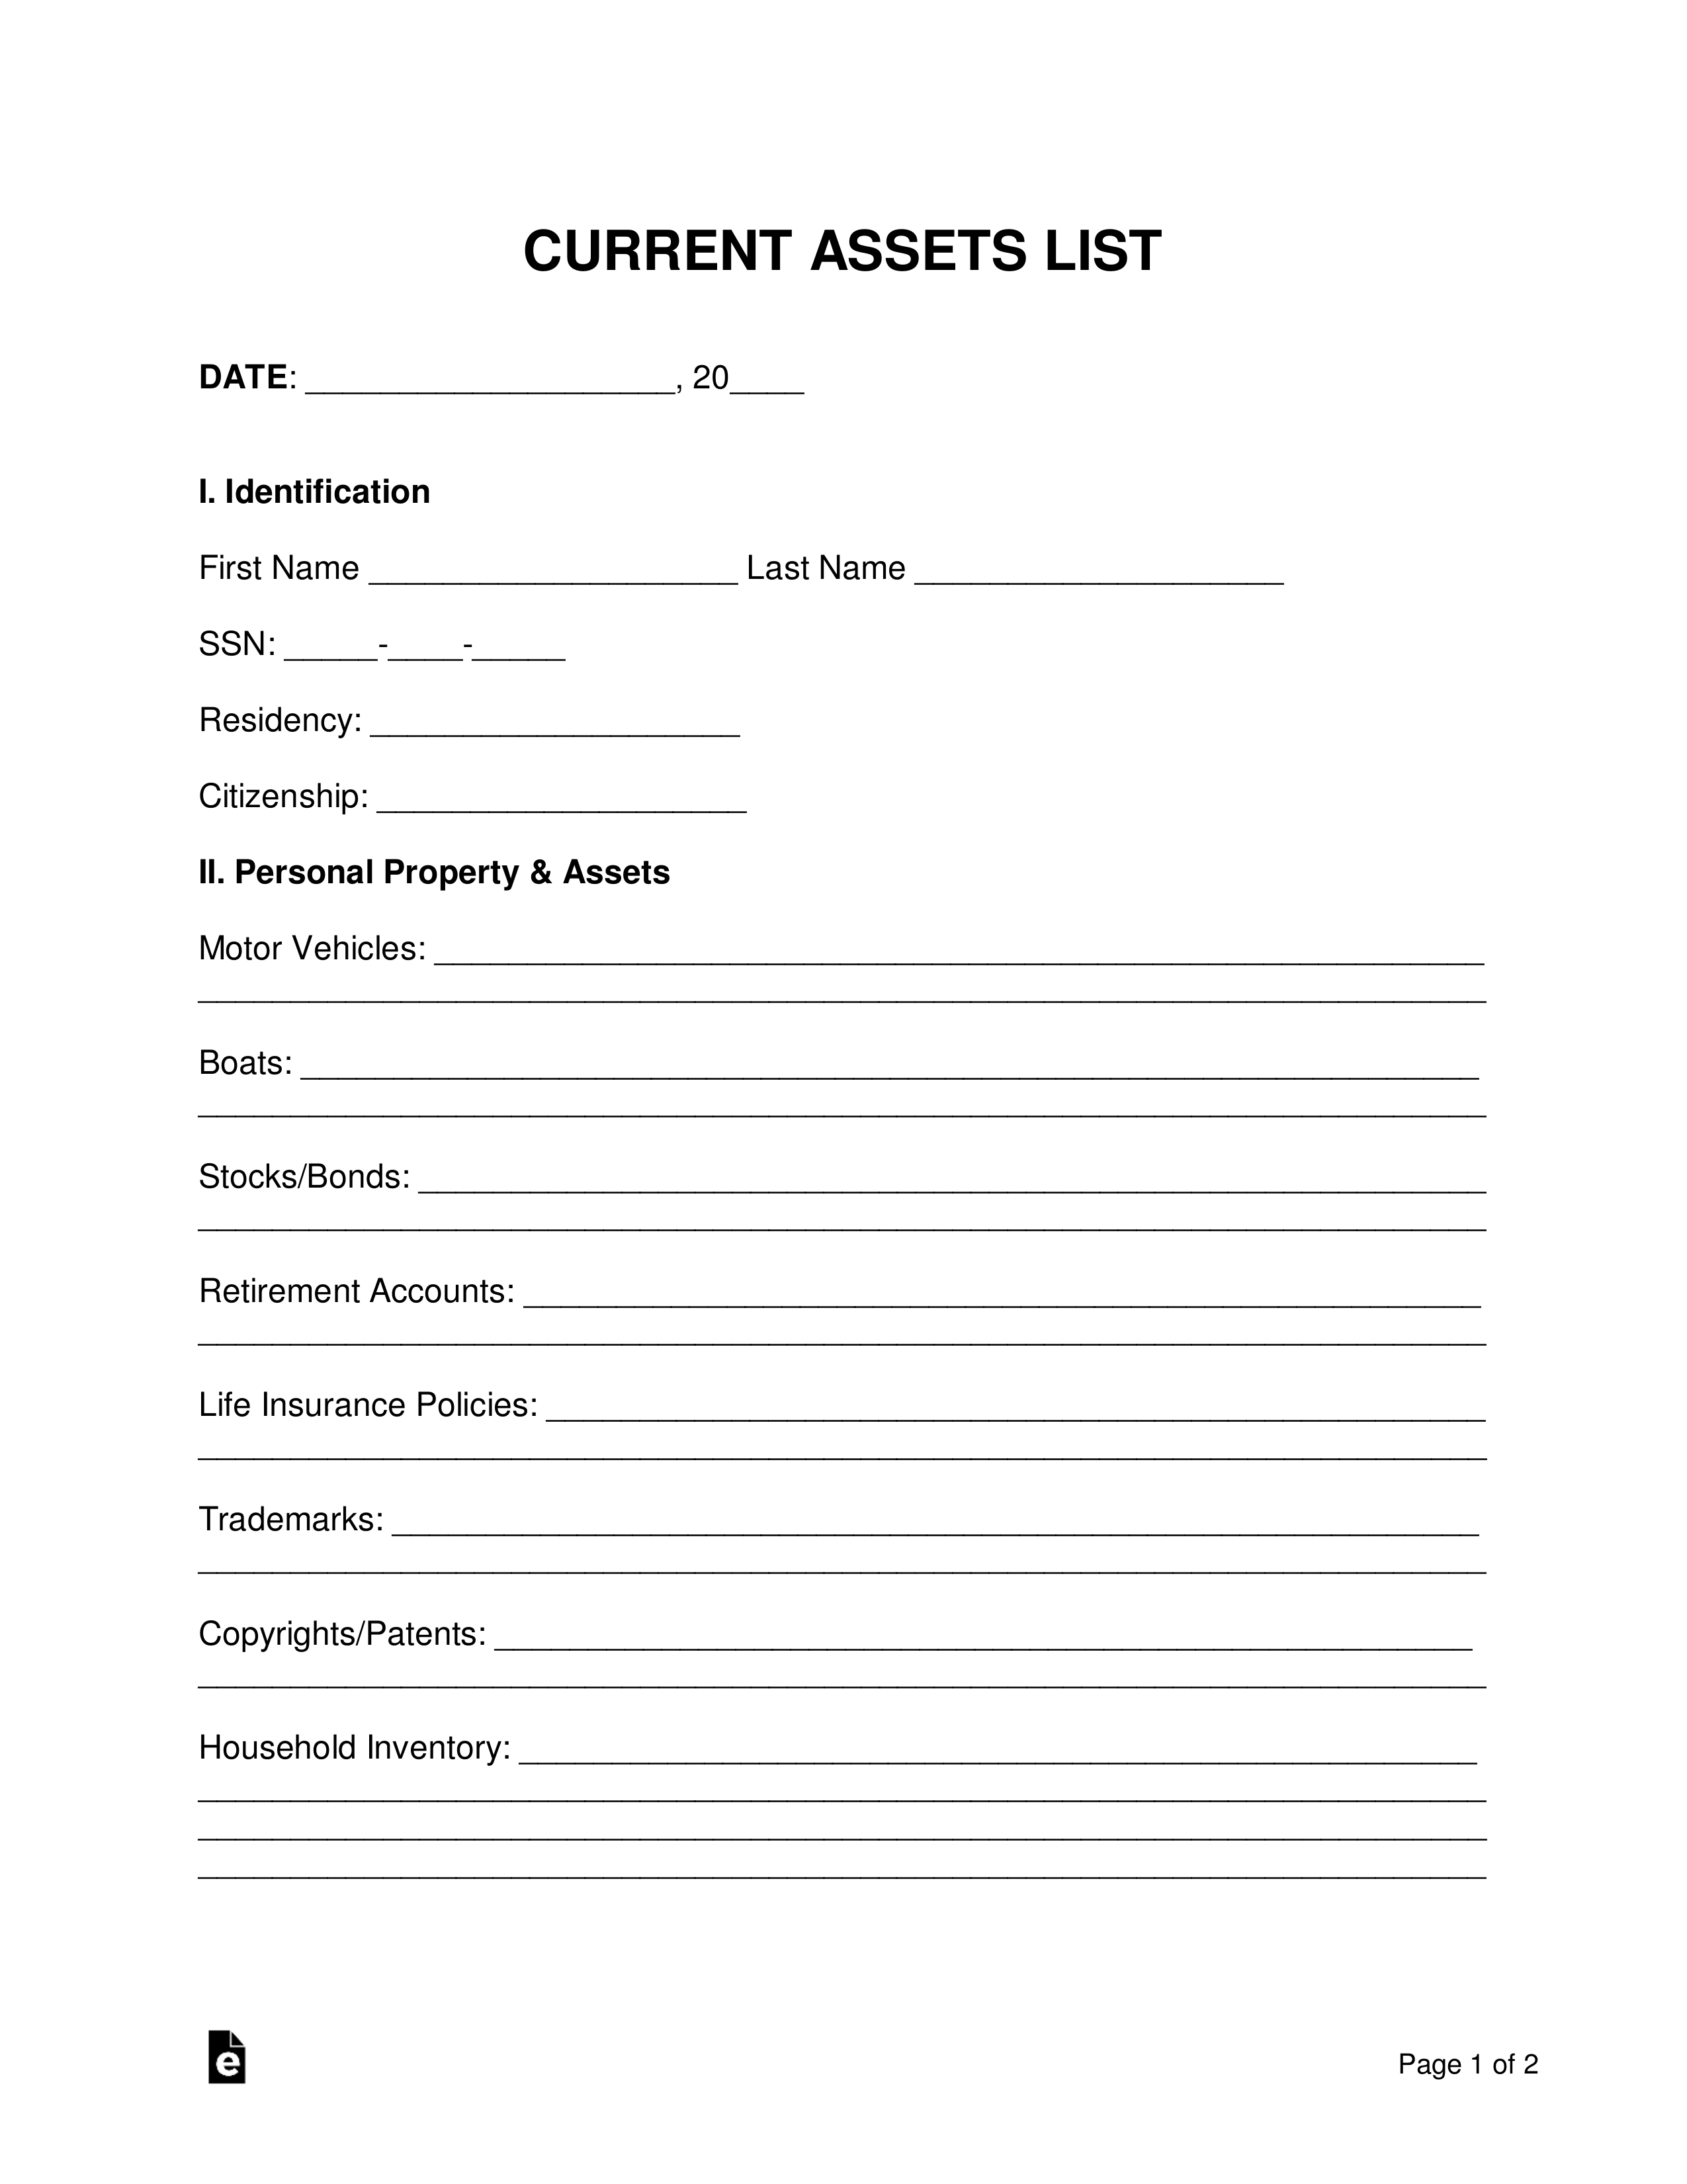 Personal Property List Template from eforms.com